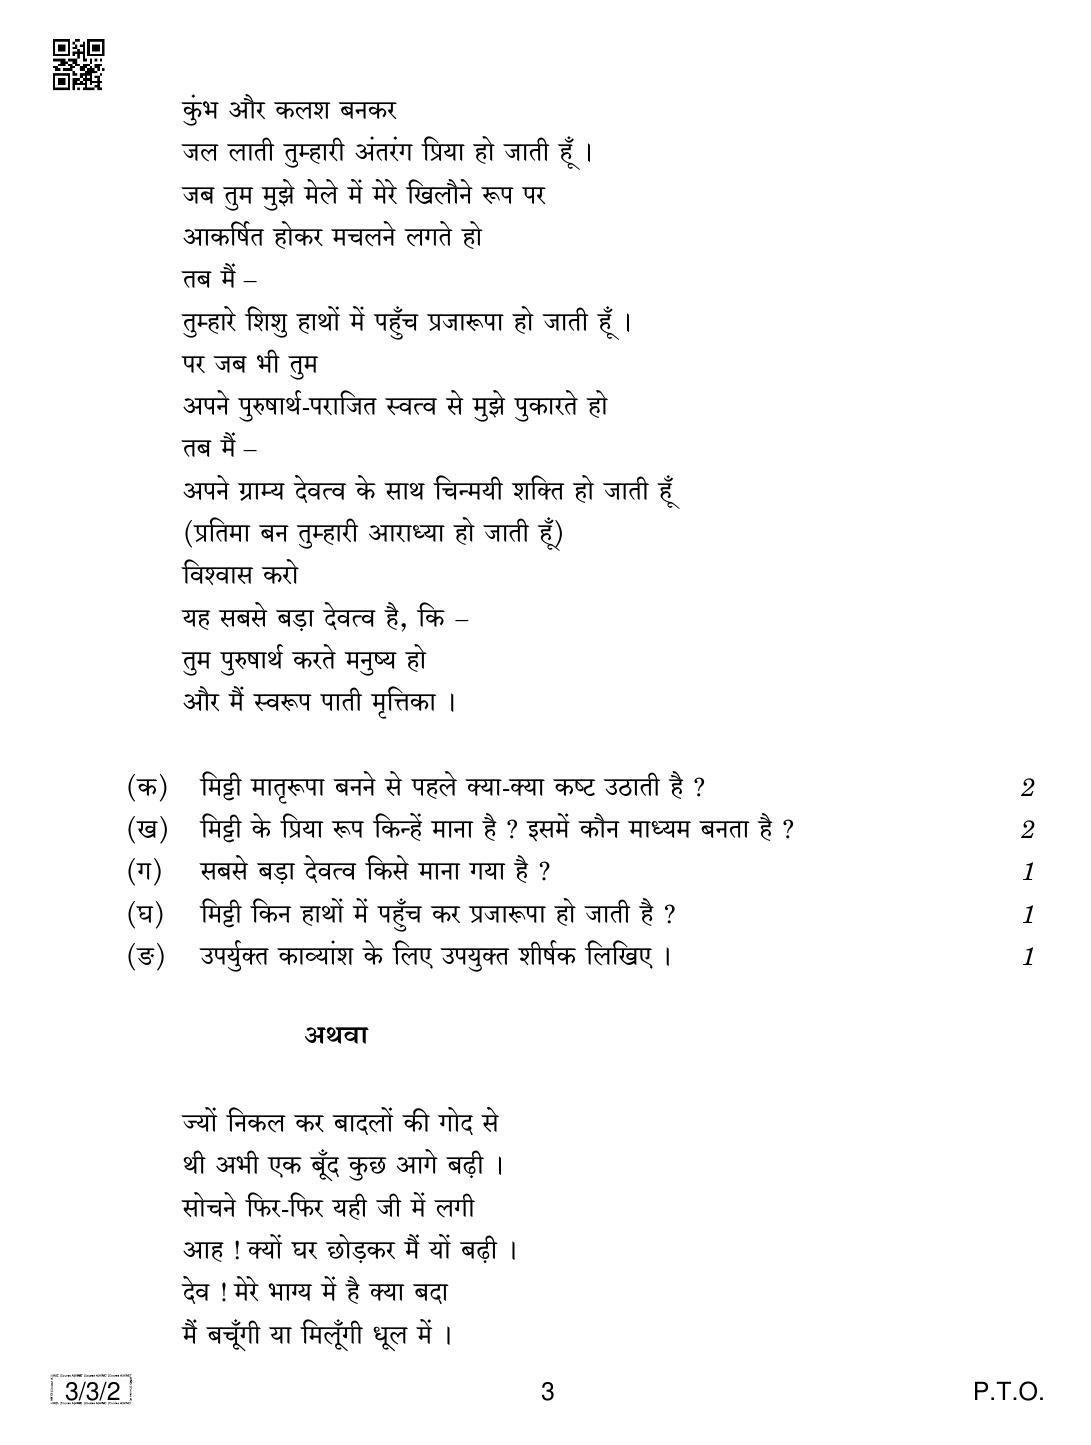 CBSE Class 10 3-3-2 HINDI COURSE- A 2019 Question Paper - Page 3